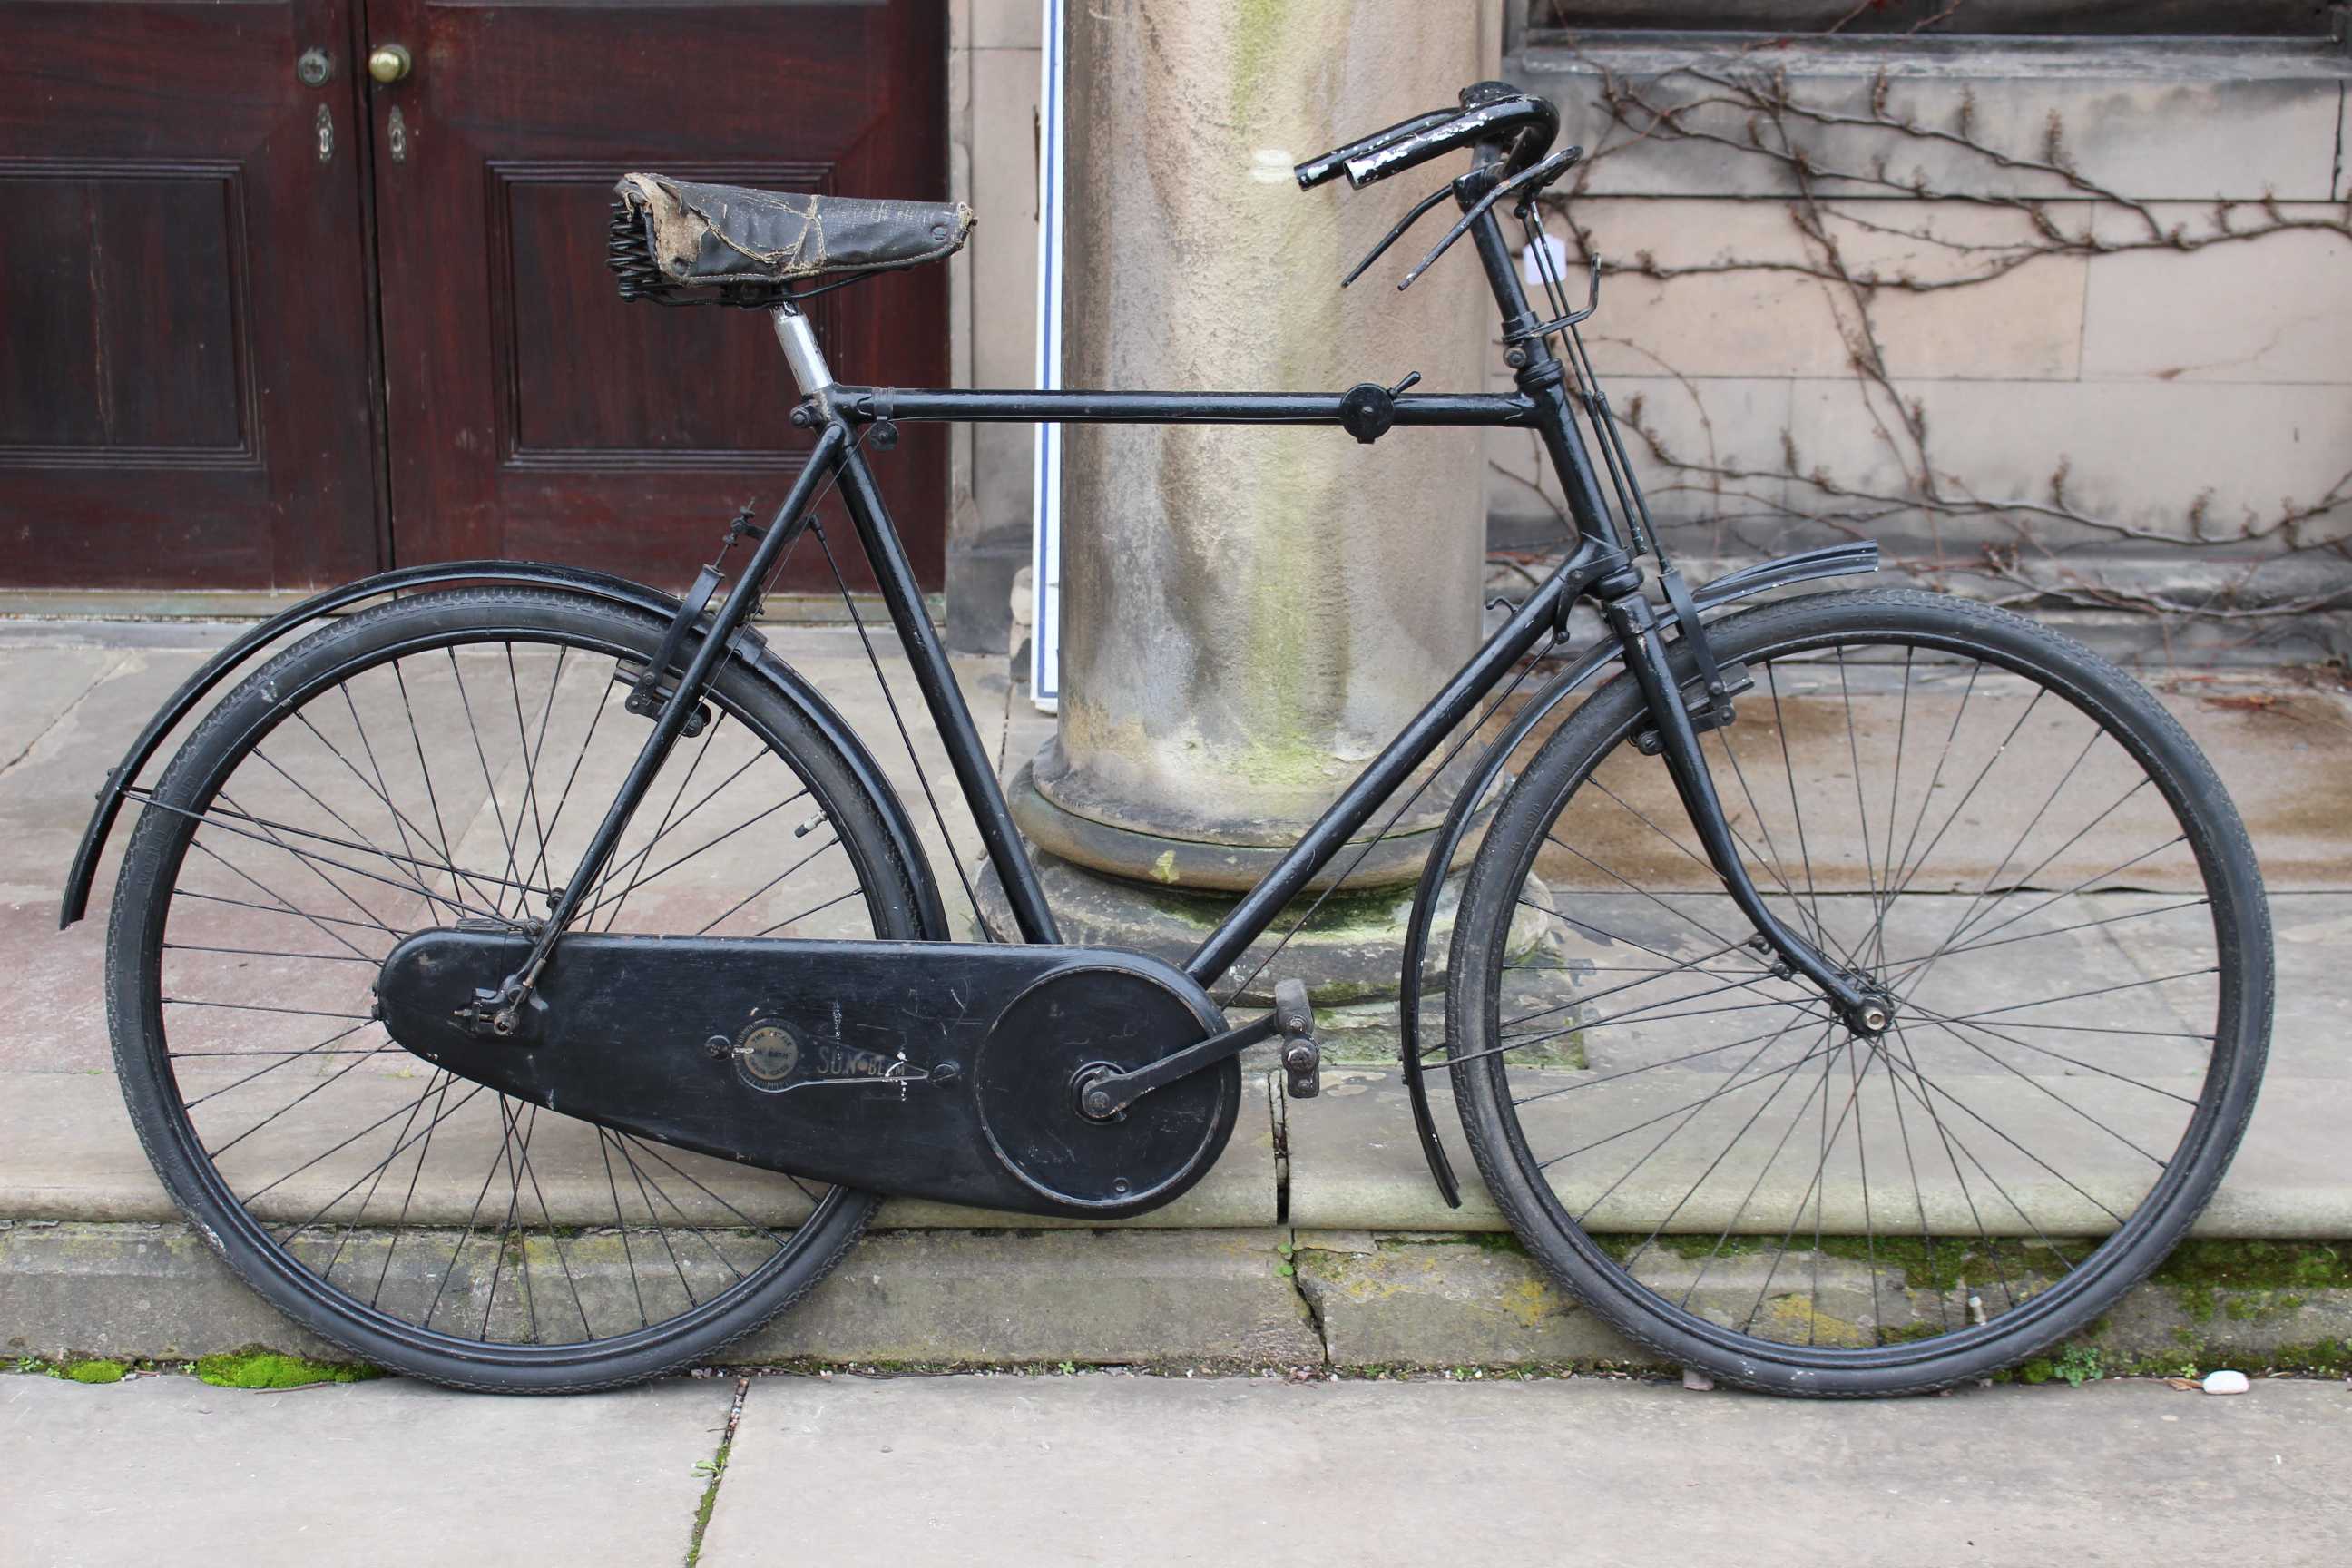 A 1943 BSA Sunbeam roadster bicycle, austerity model with oil bath chain case with original decal,